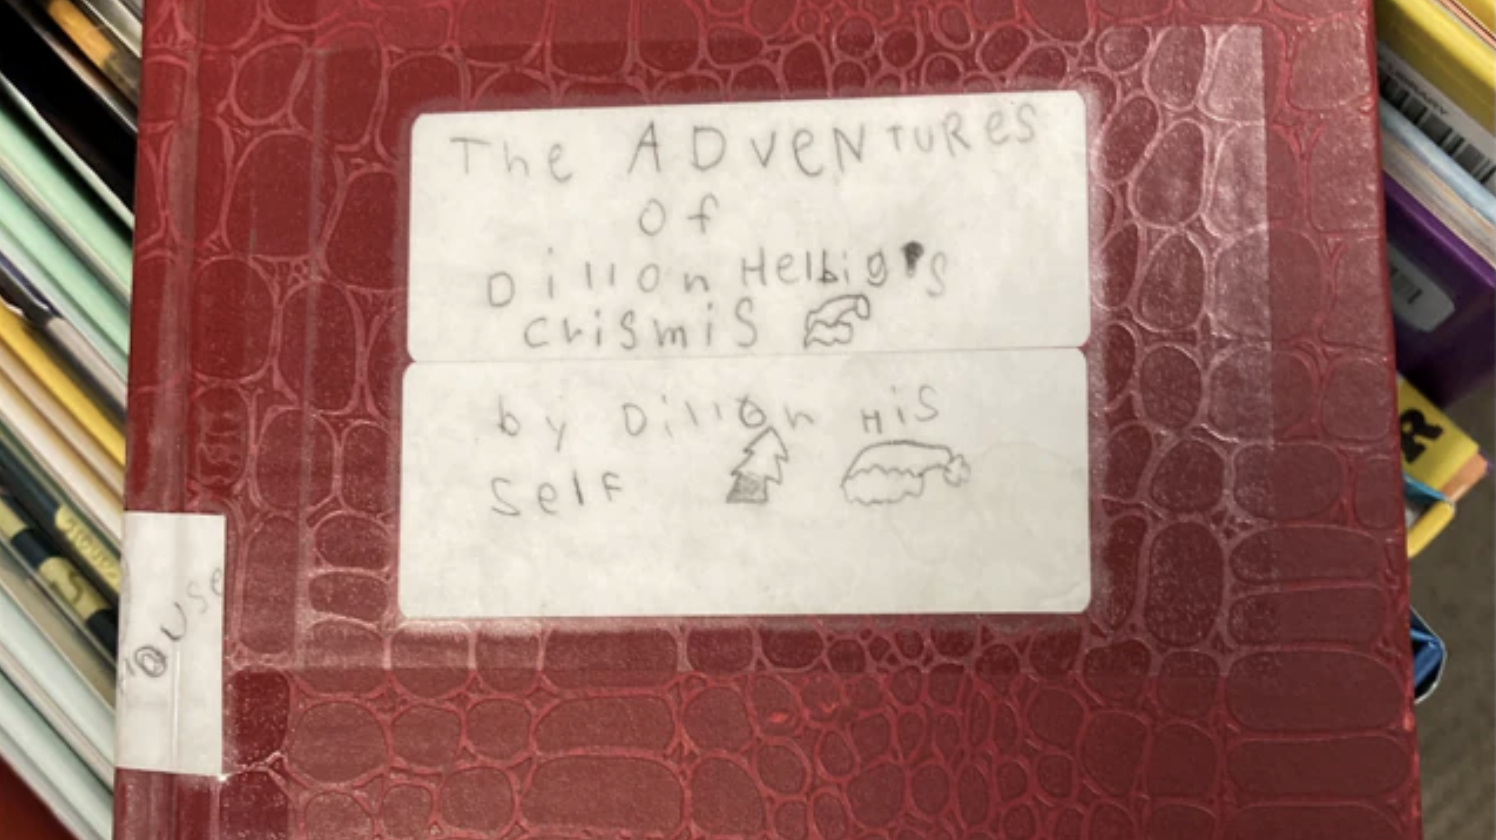 8-year-old Dillon Helbig's comic book